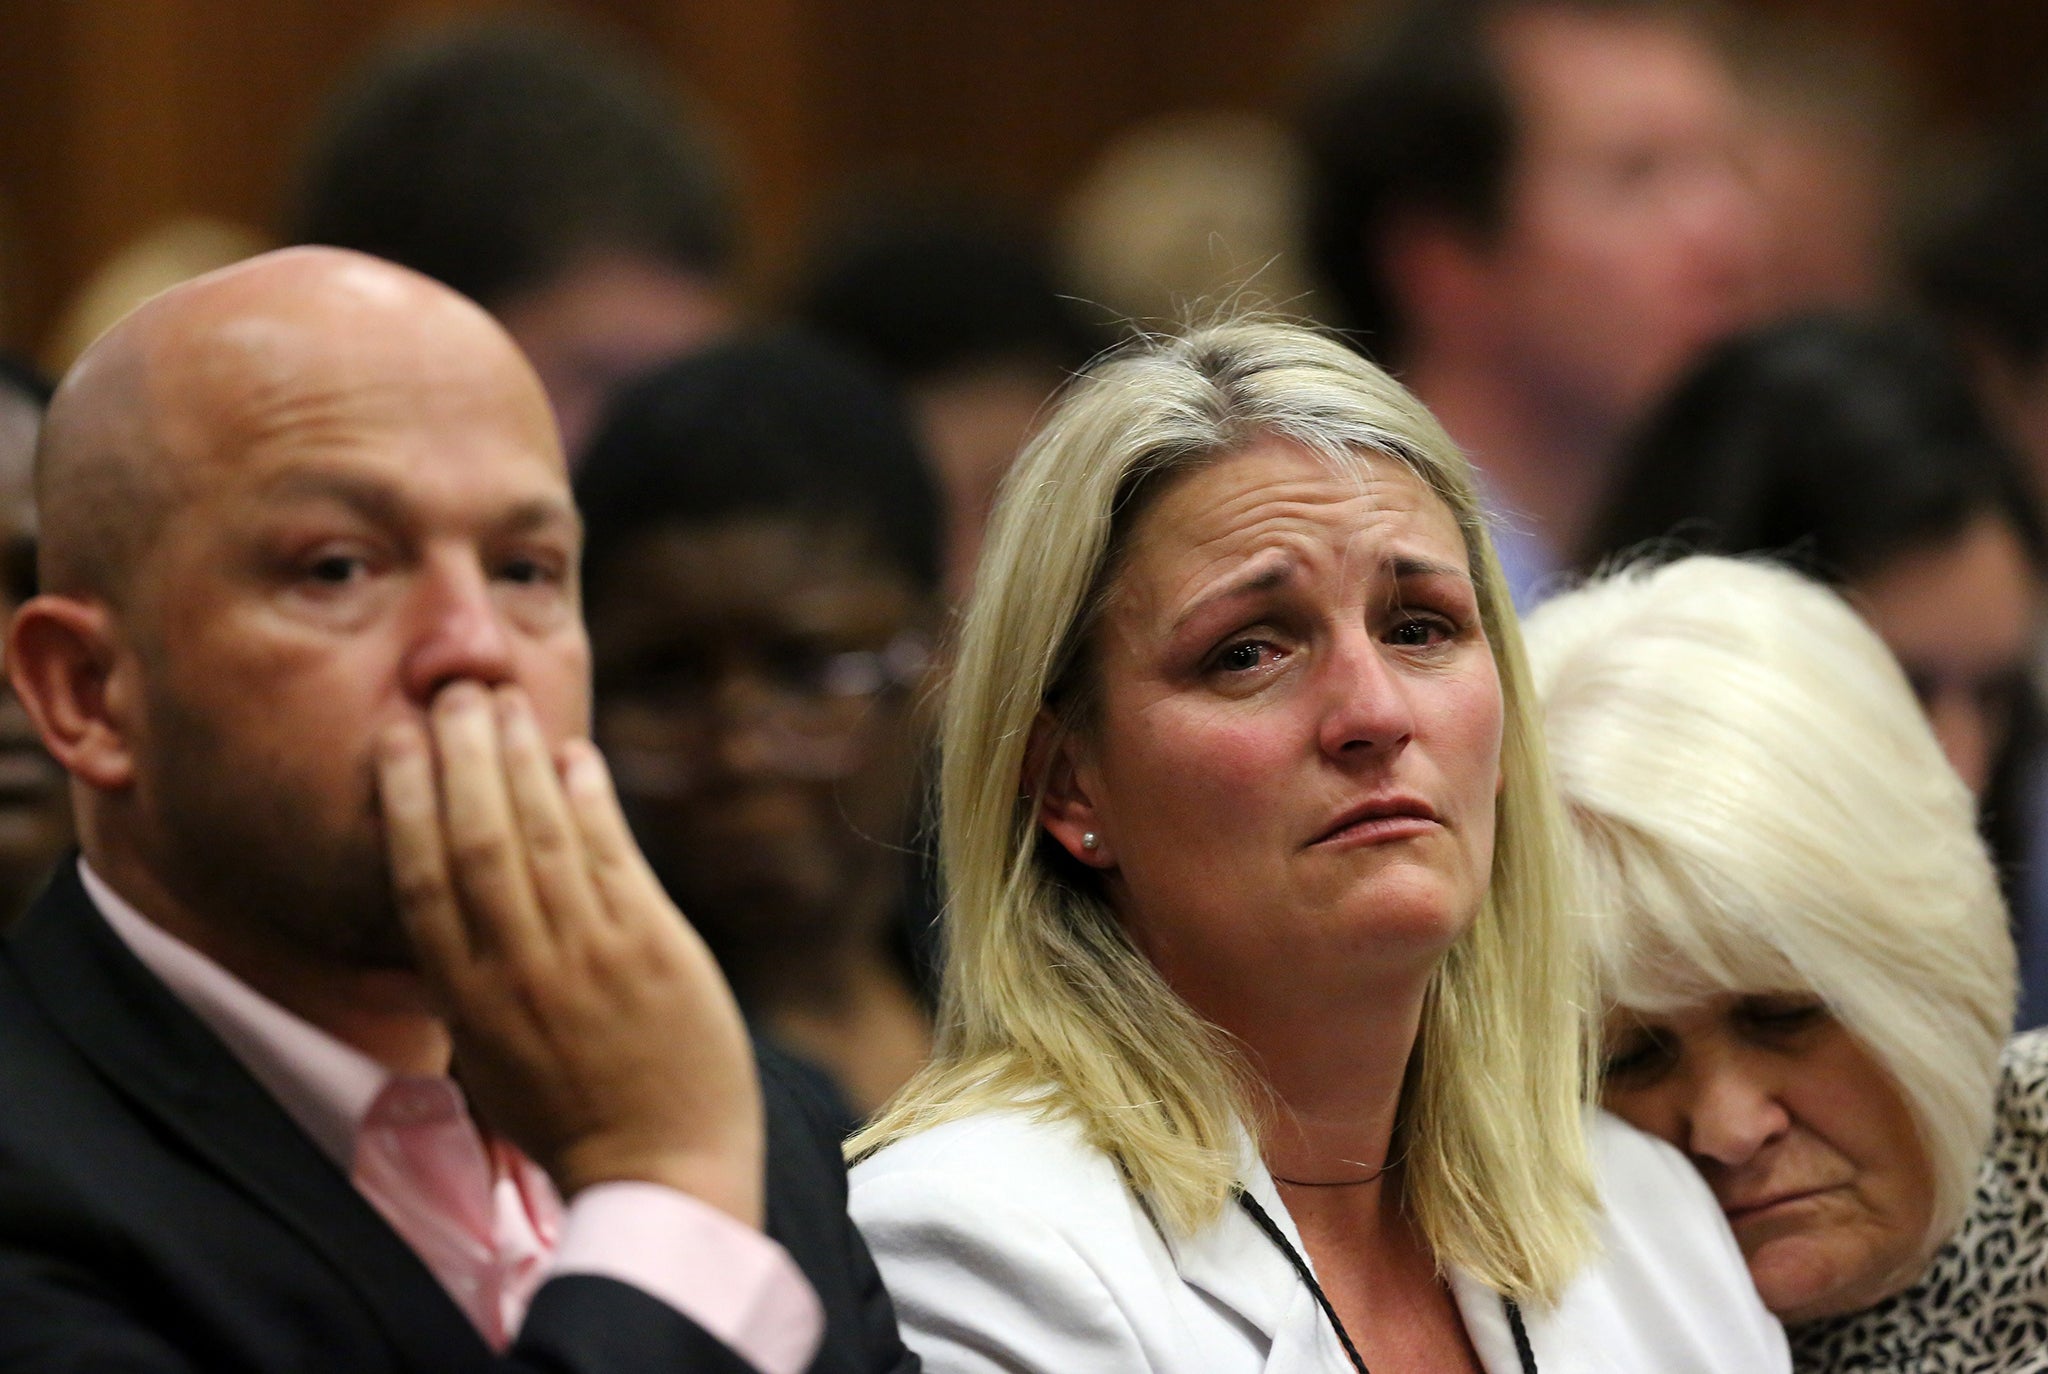 Family members of Reeva Steenkamp react as they listen to the verdict of Oscar Pistorius at the high court in Pretoria